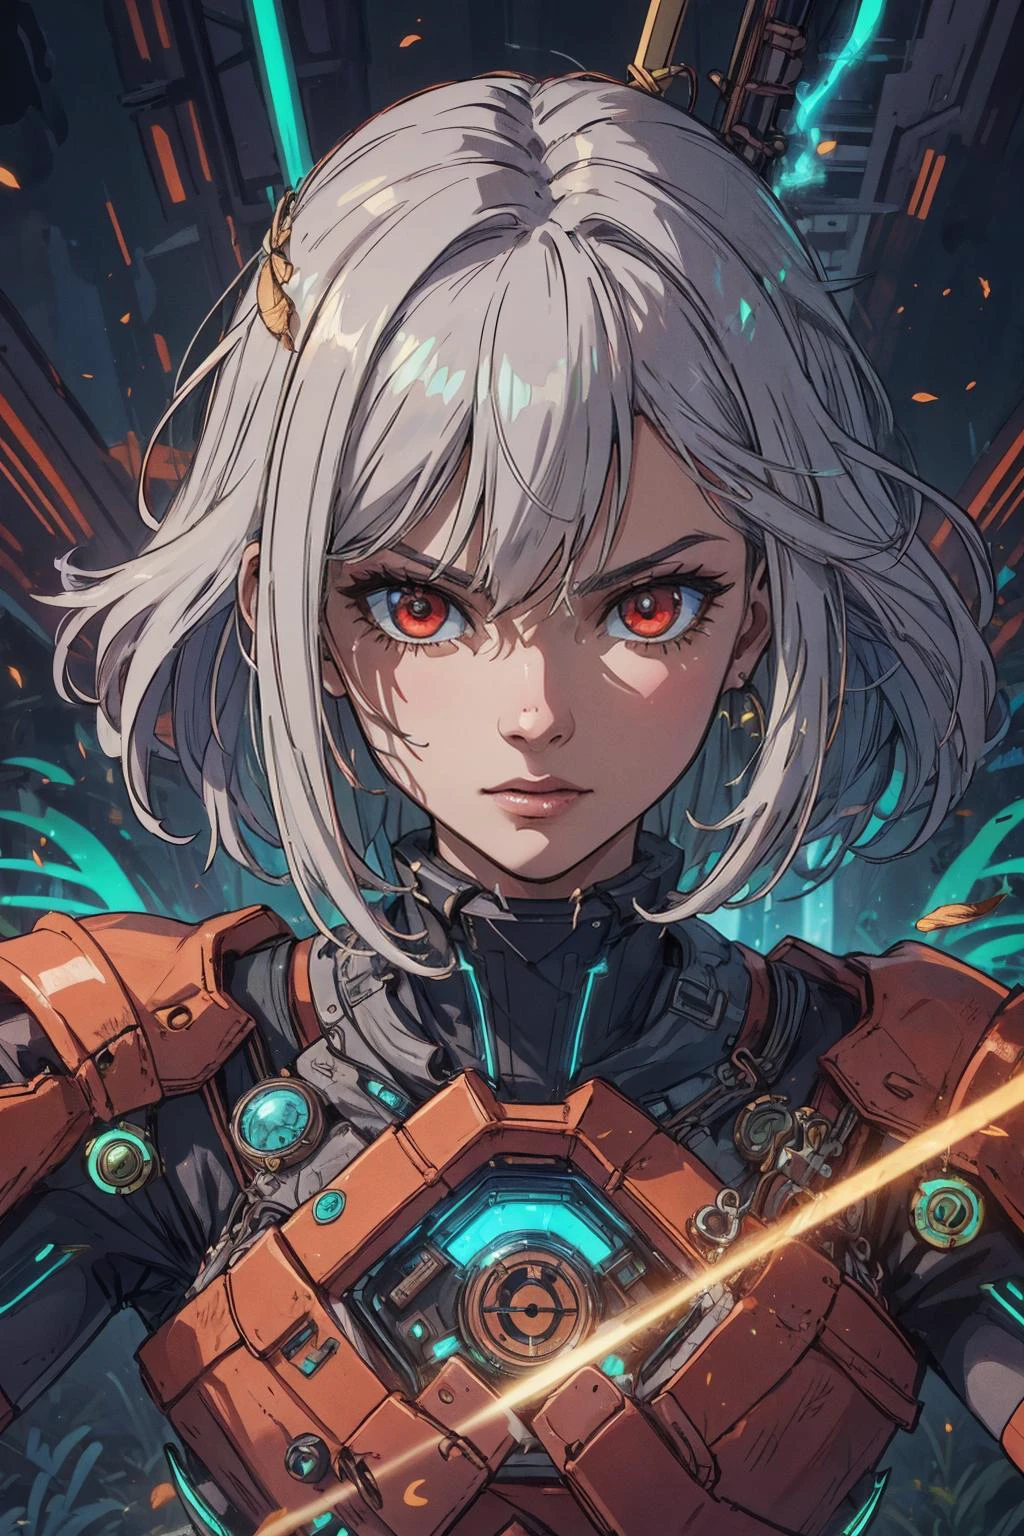 beautiful, linework, (outlines:1.05), shadows, (splash art:1.2), (volumetric lighting:1.2),
1 girl, adult  woman,  red eyes, white straight hair,  
cyborg portrait,  looking at viewer, solo,  half shot, detailed background, close up, detailed face,  futuristic shining  copper armor,  honeycomb pattern, cape, high-tech,  modules,    (open helmet:0.6), head-up display, dynamic pose, epic galactic space station in background,  lens flare, neon lights, lasers,     hologram, cinematic atmosphere,